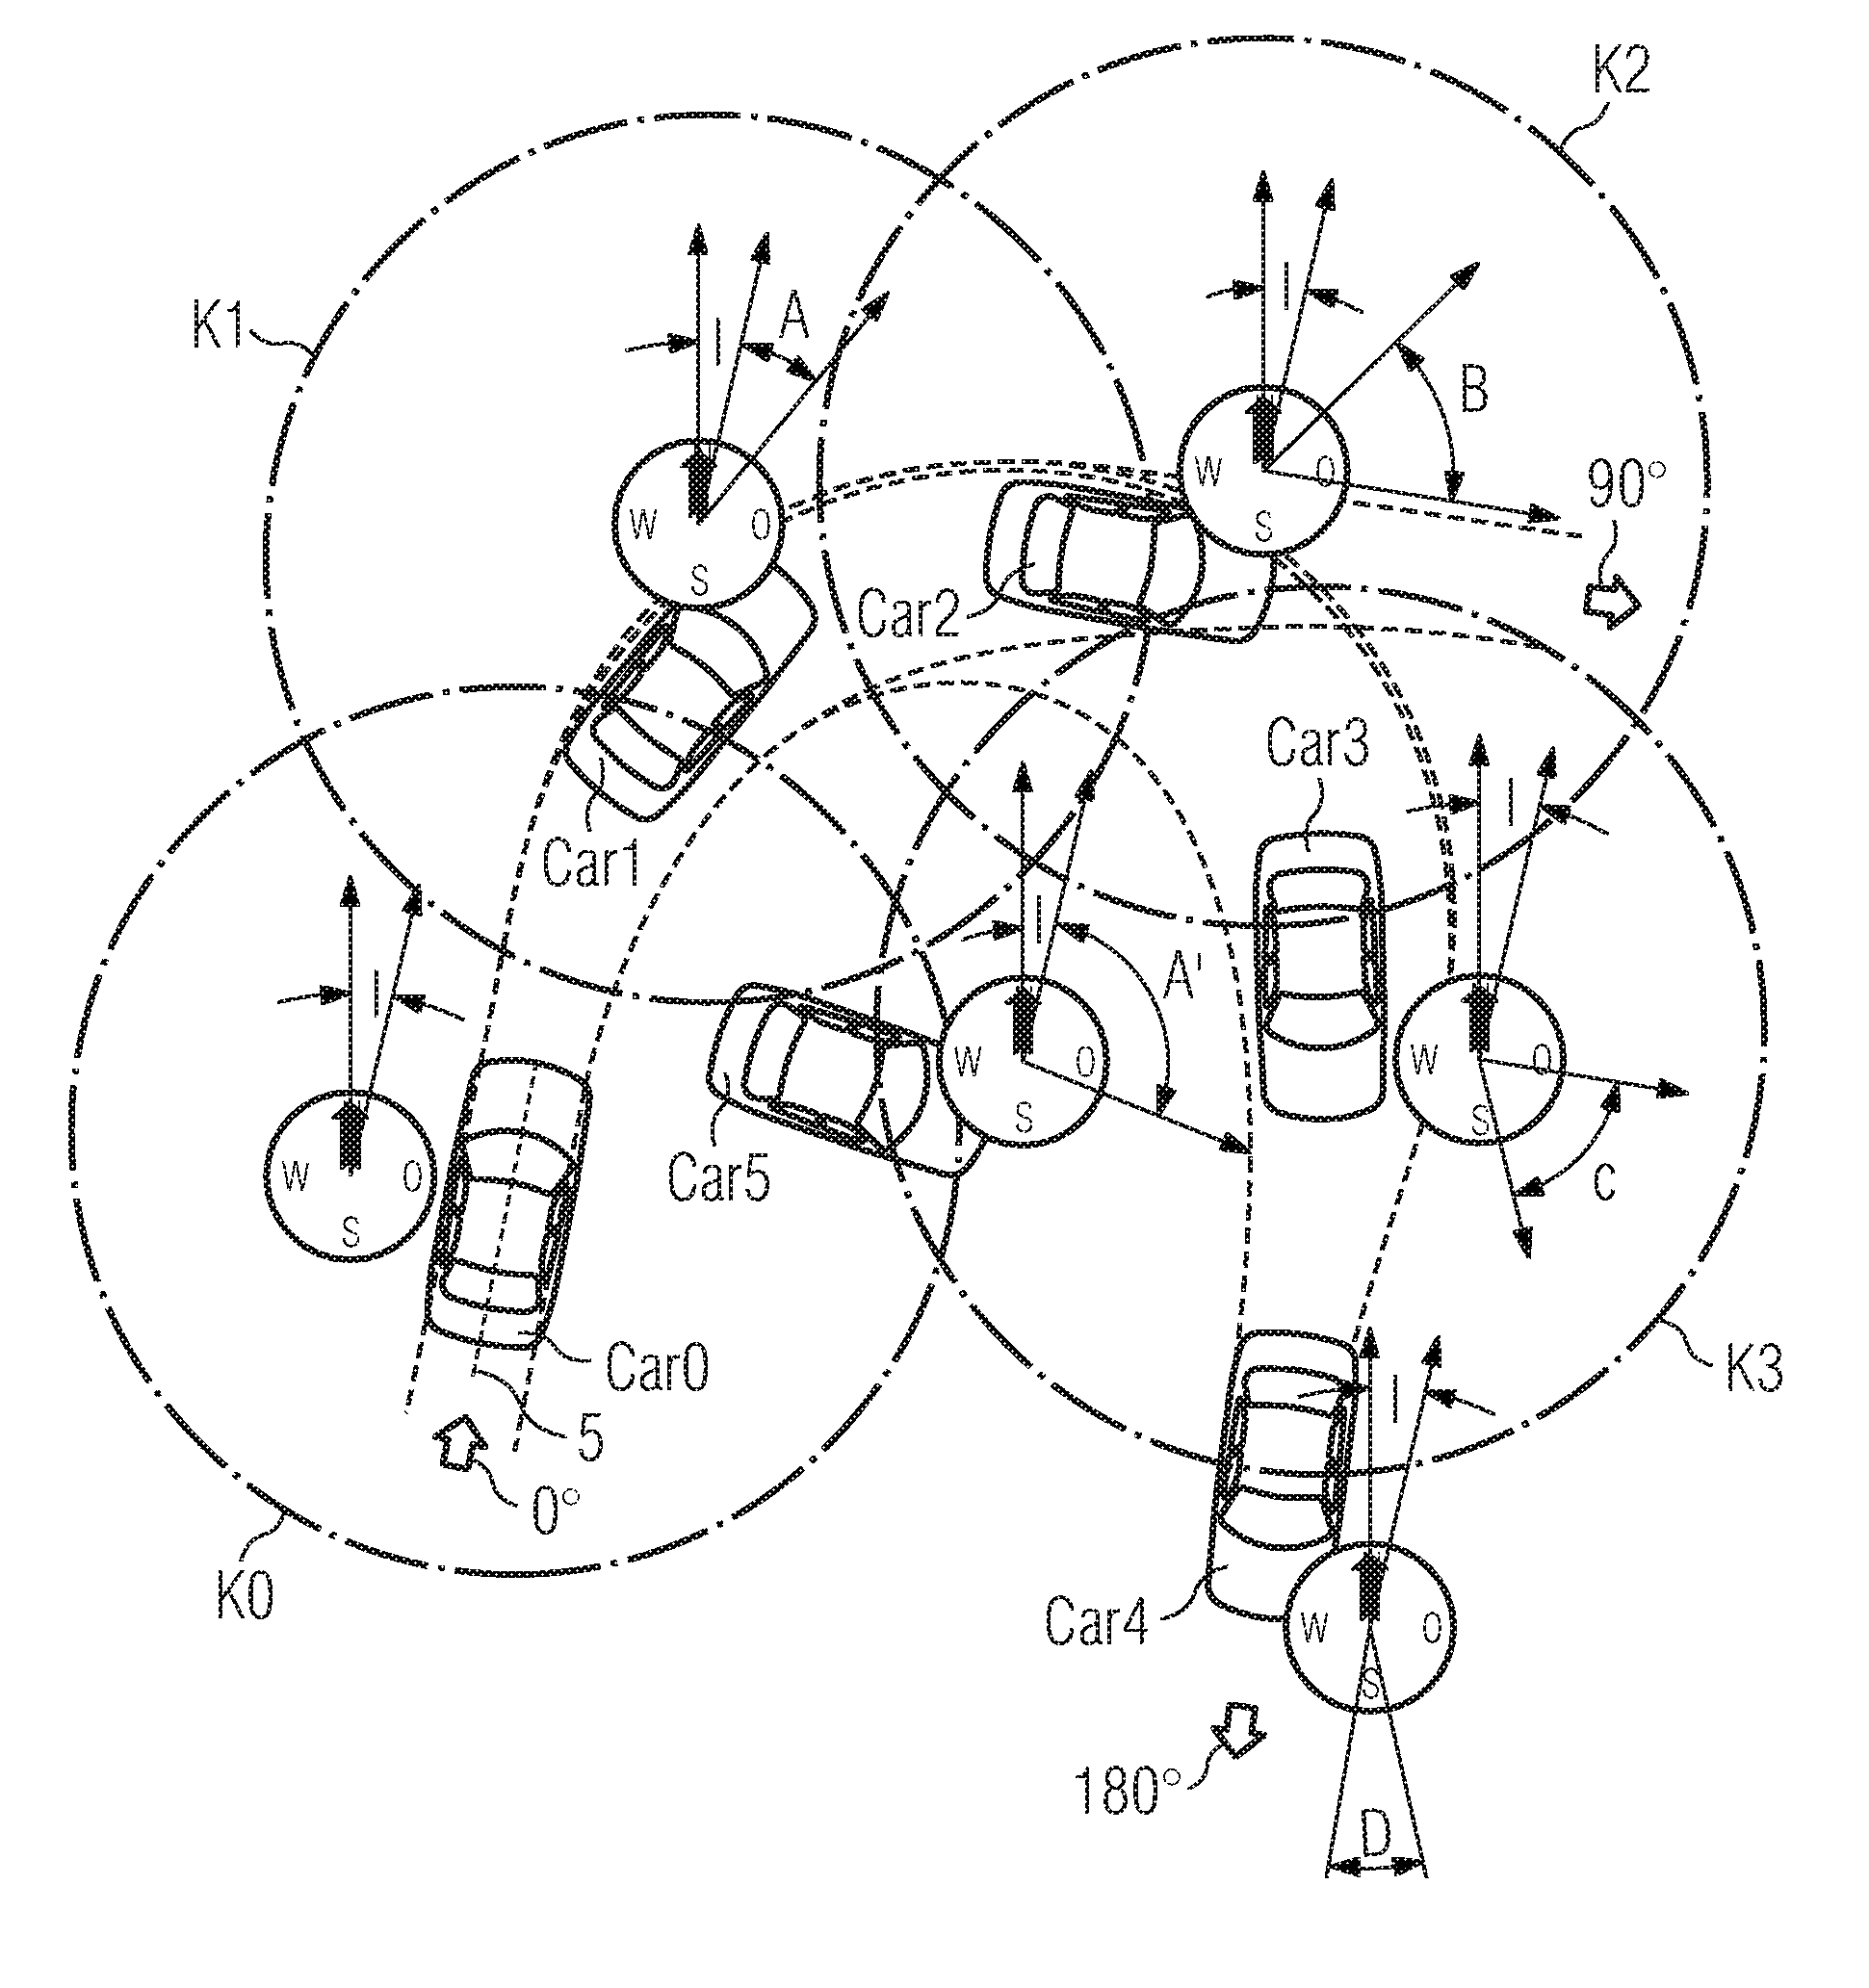 Communication system in a motor vehicle, and method for setting up a wireless ad-hoc radio network